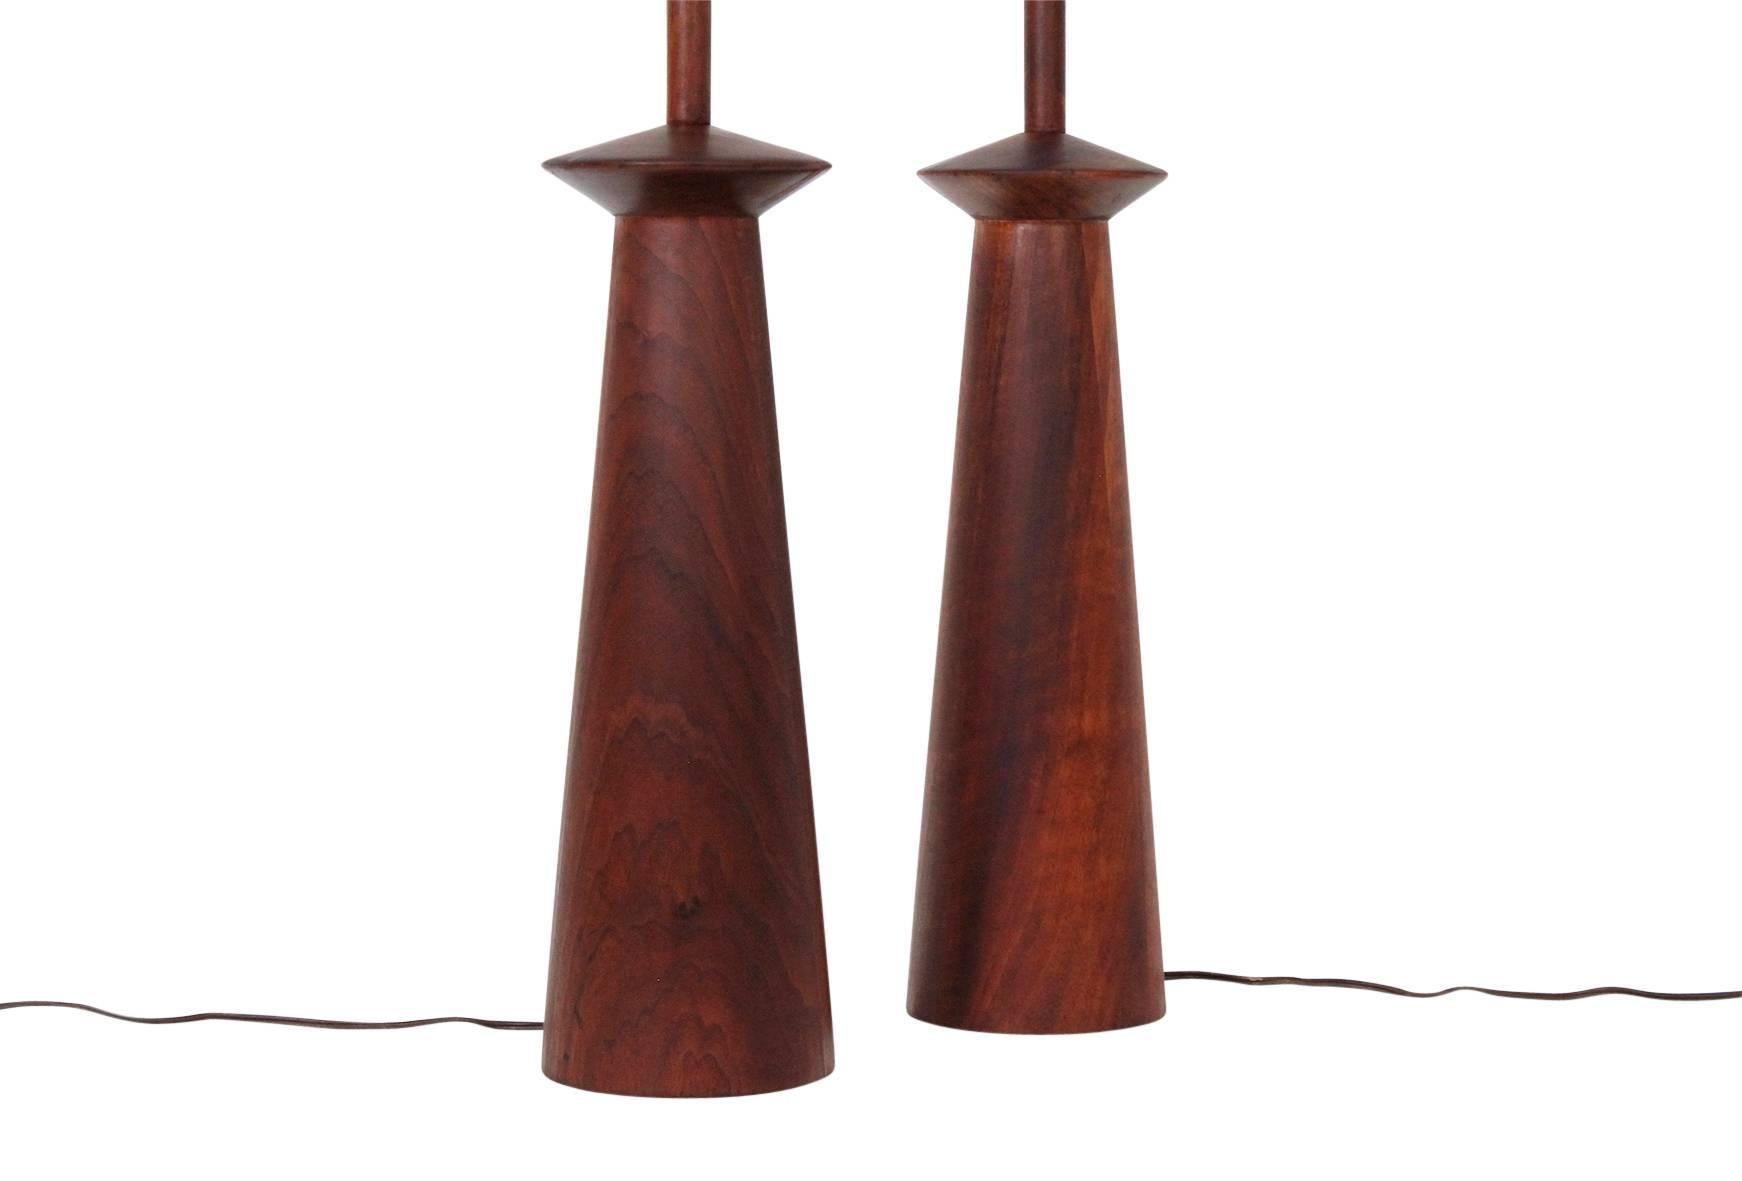 American Pair of Walnut Table Lamps by Martz